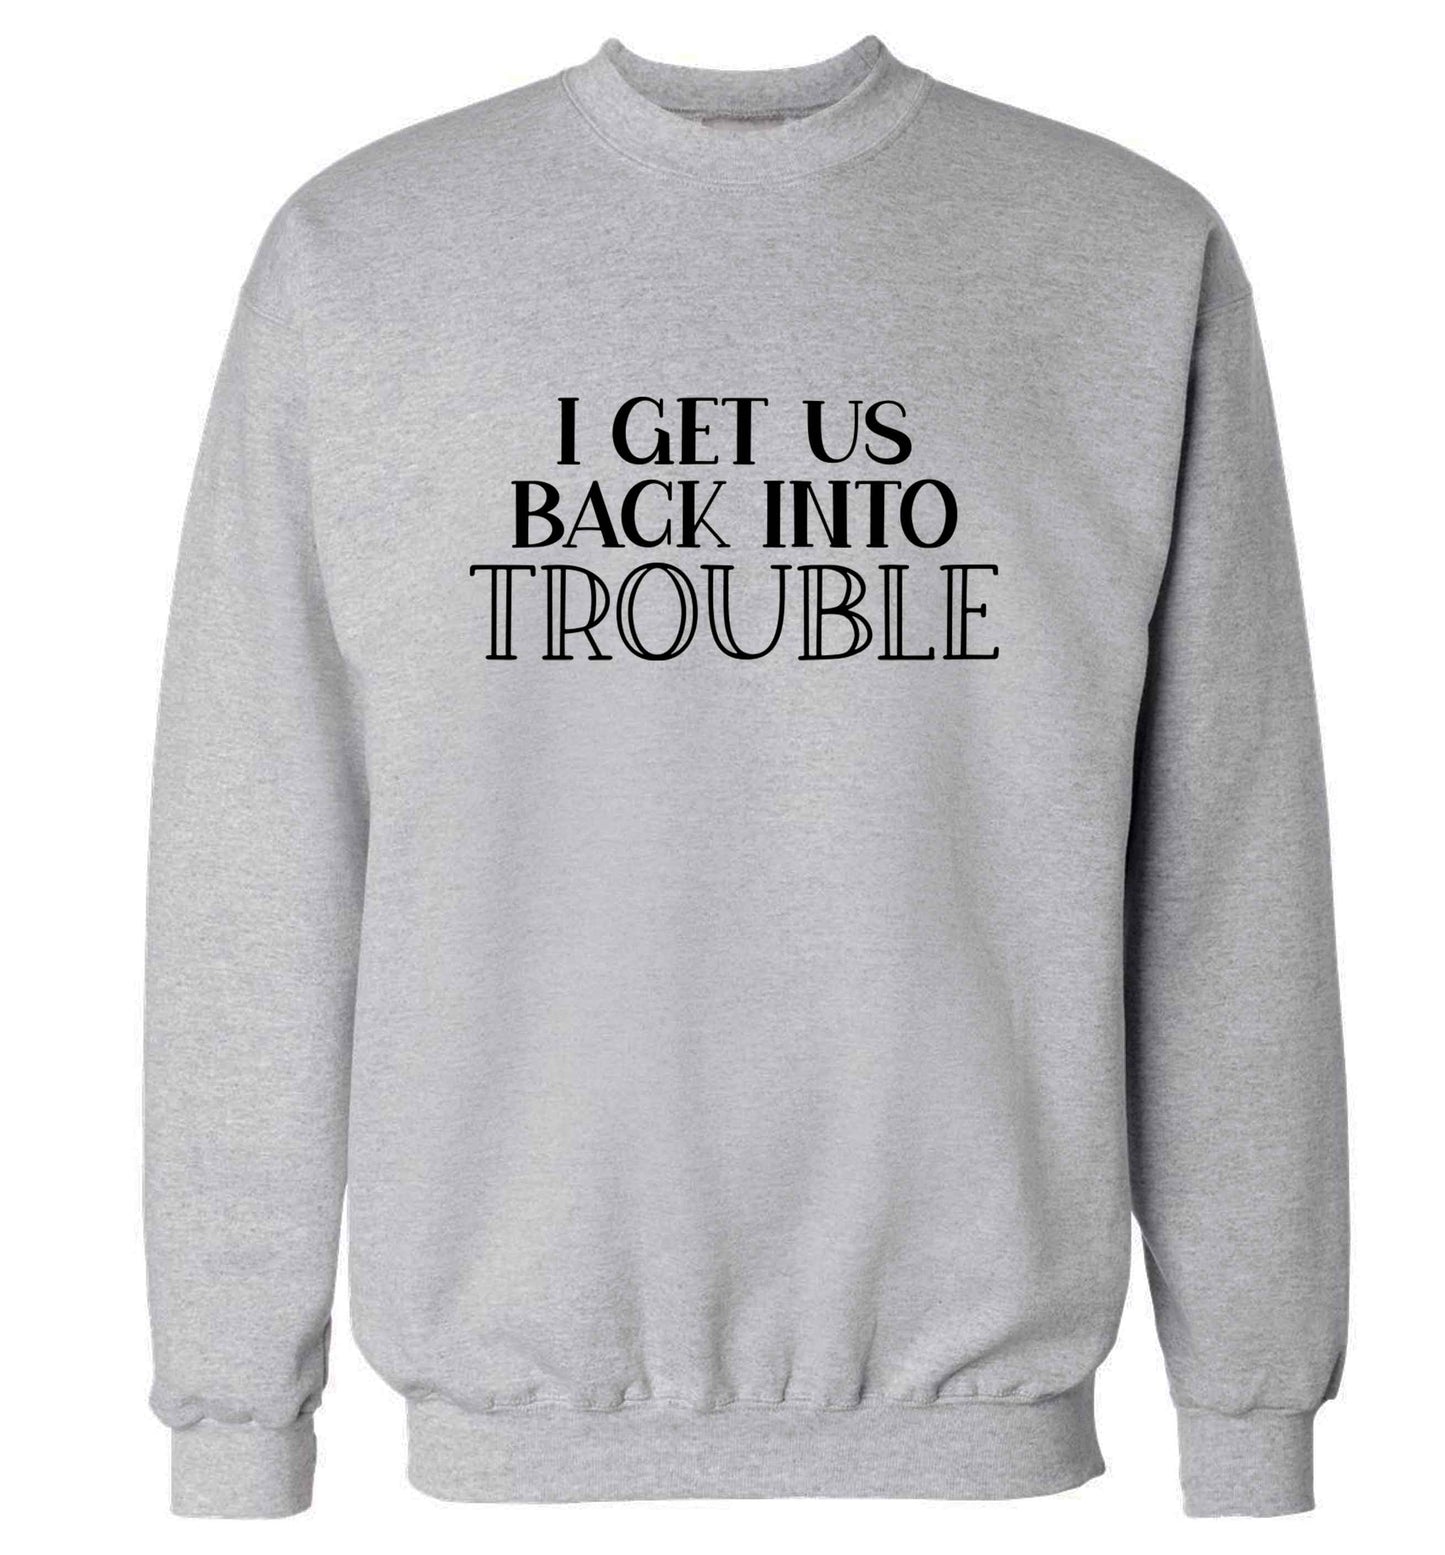 I get us back into trouble adult's unisex grey sweater 2XL